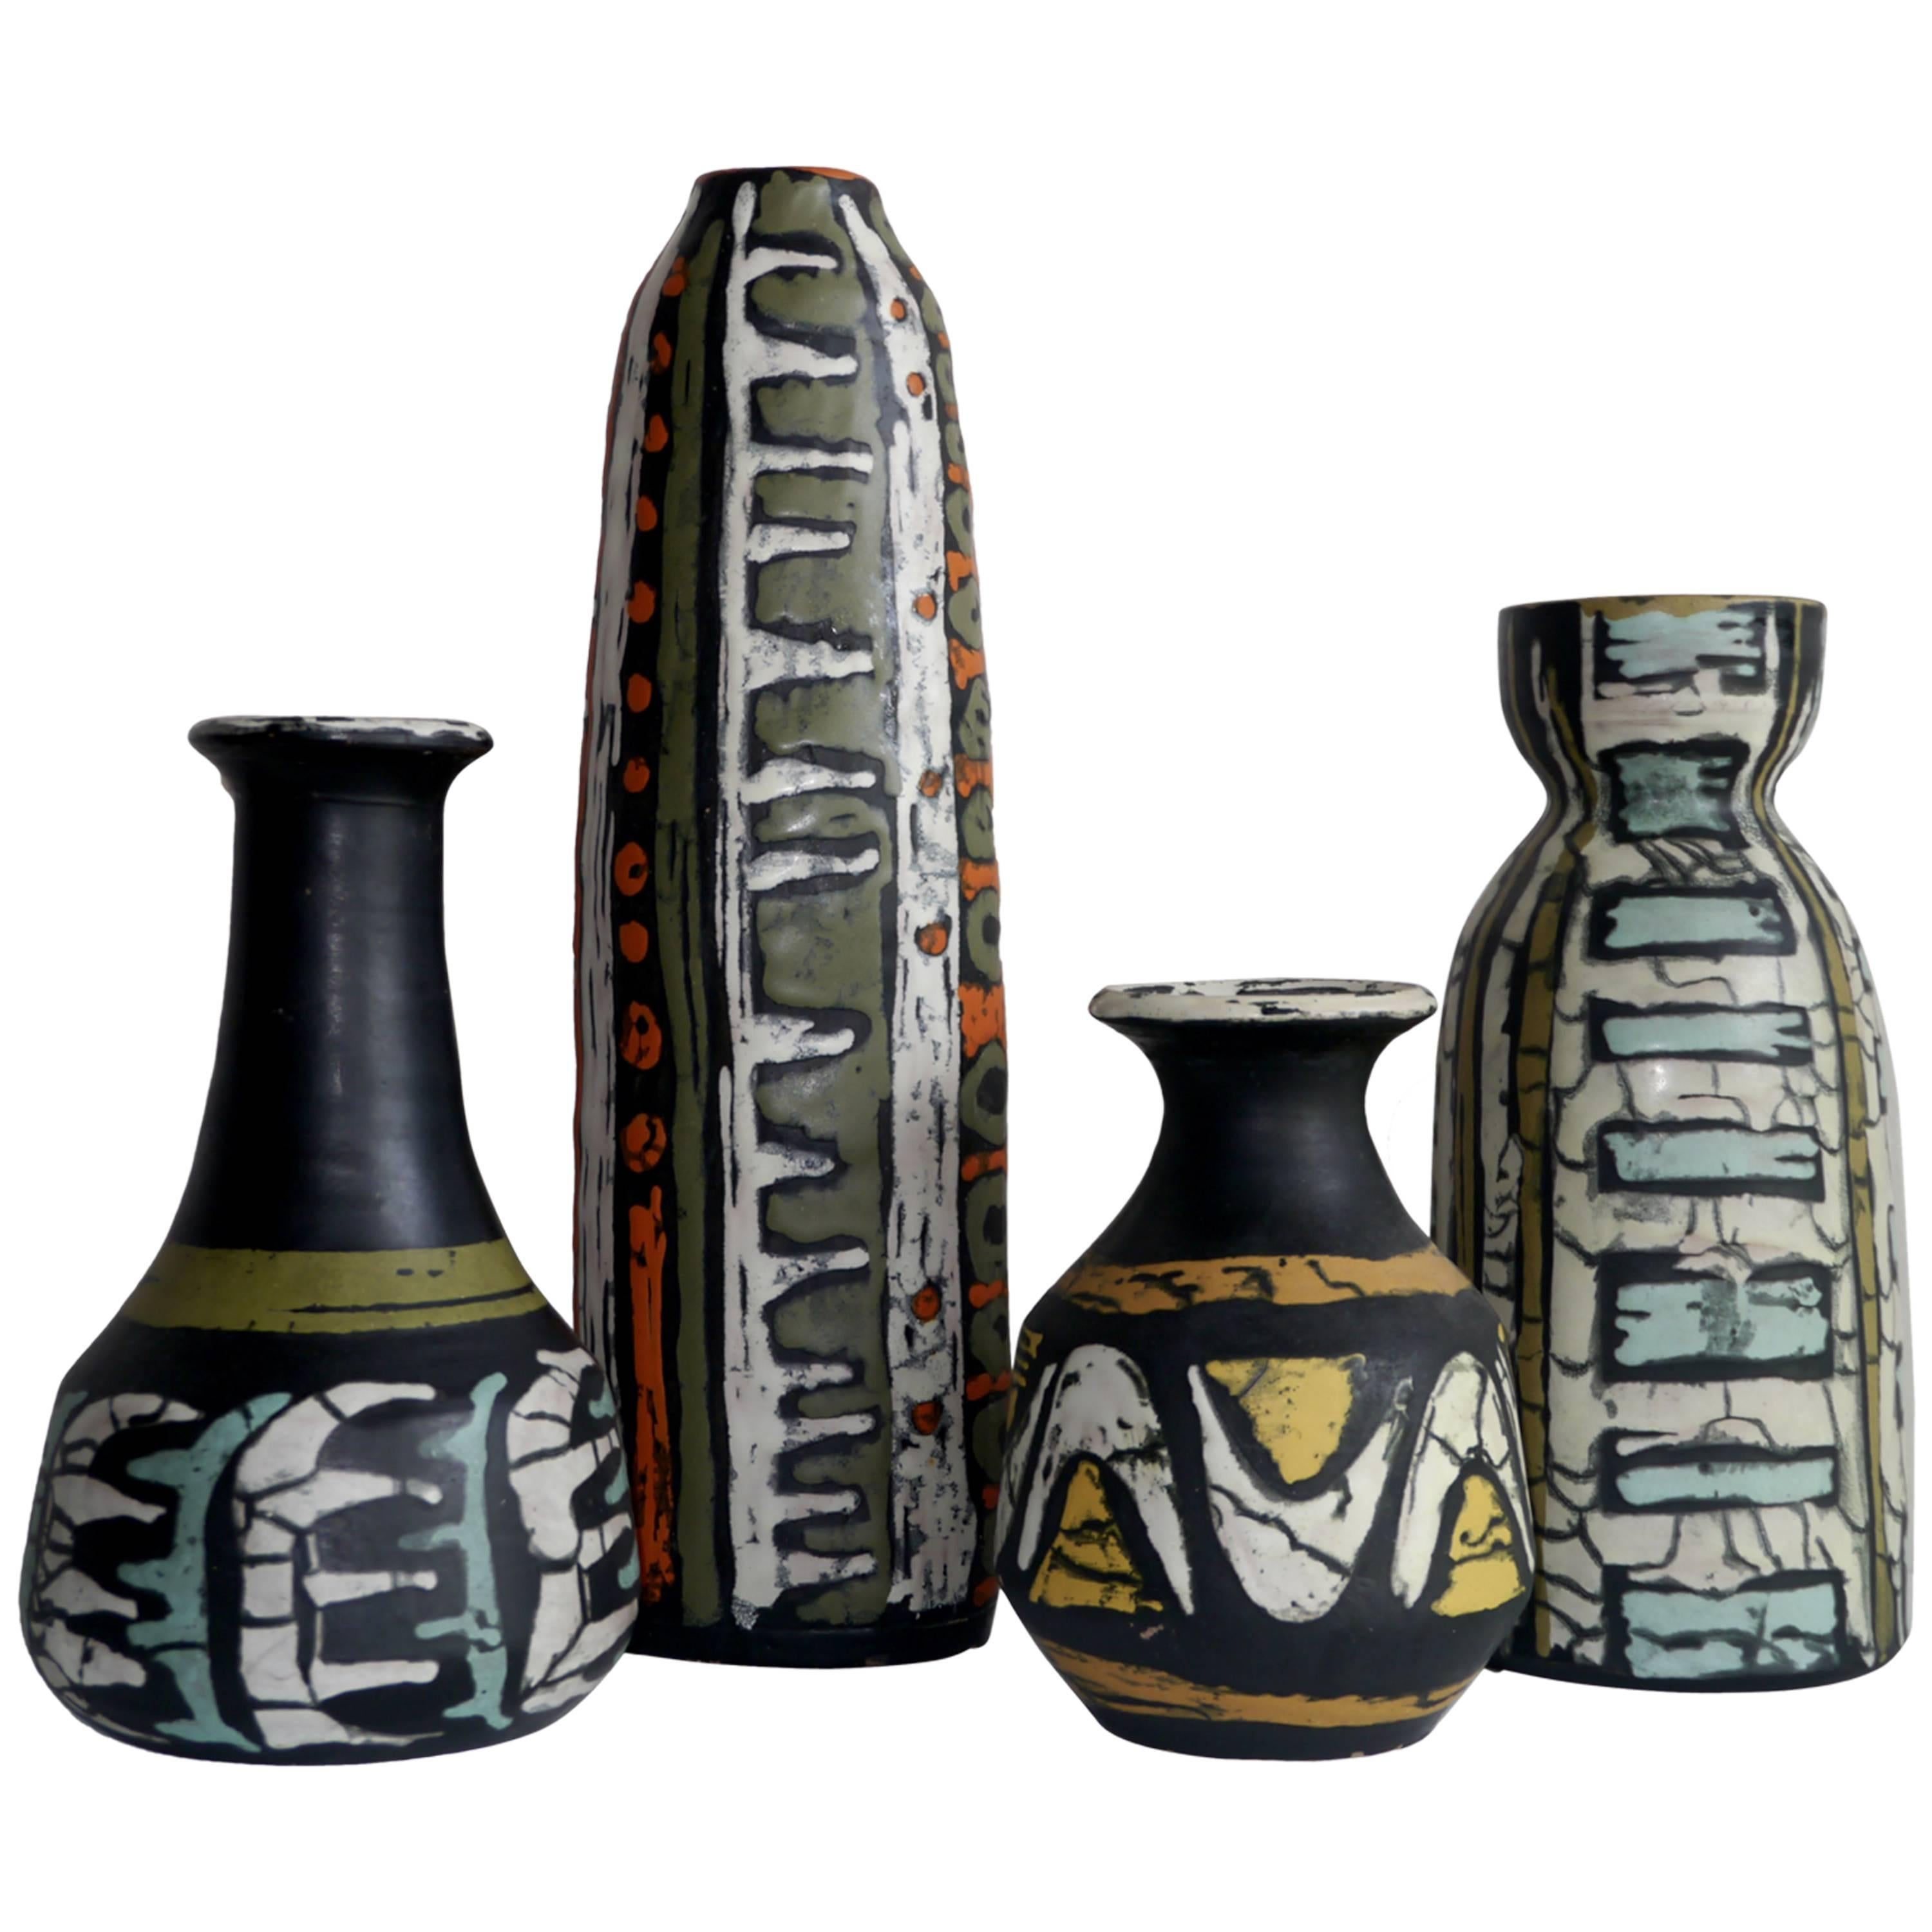 Livia Gorka - Grouping of 4 Vases - Hungary, c. 1950 For Sale